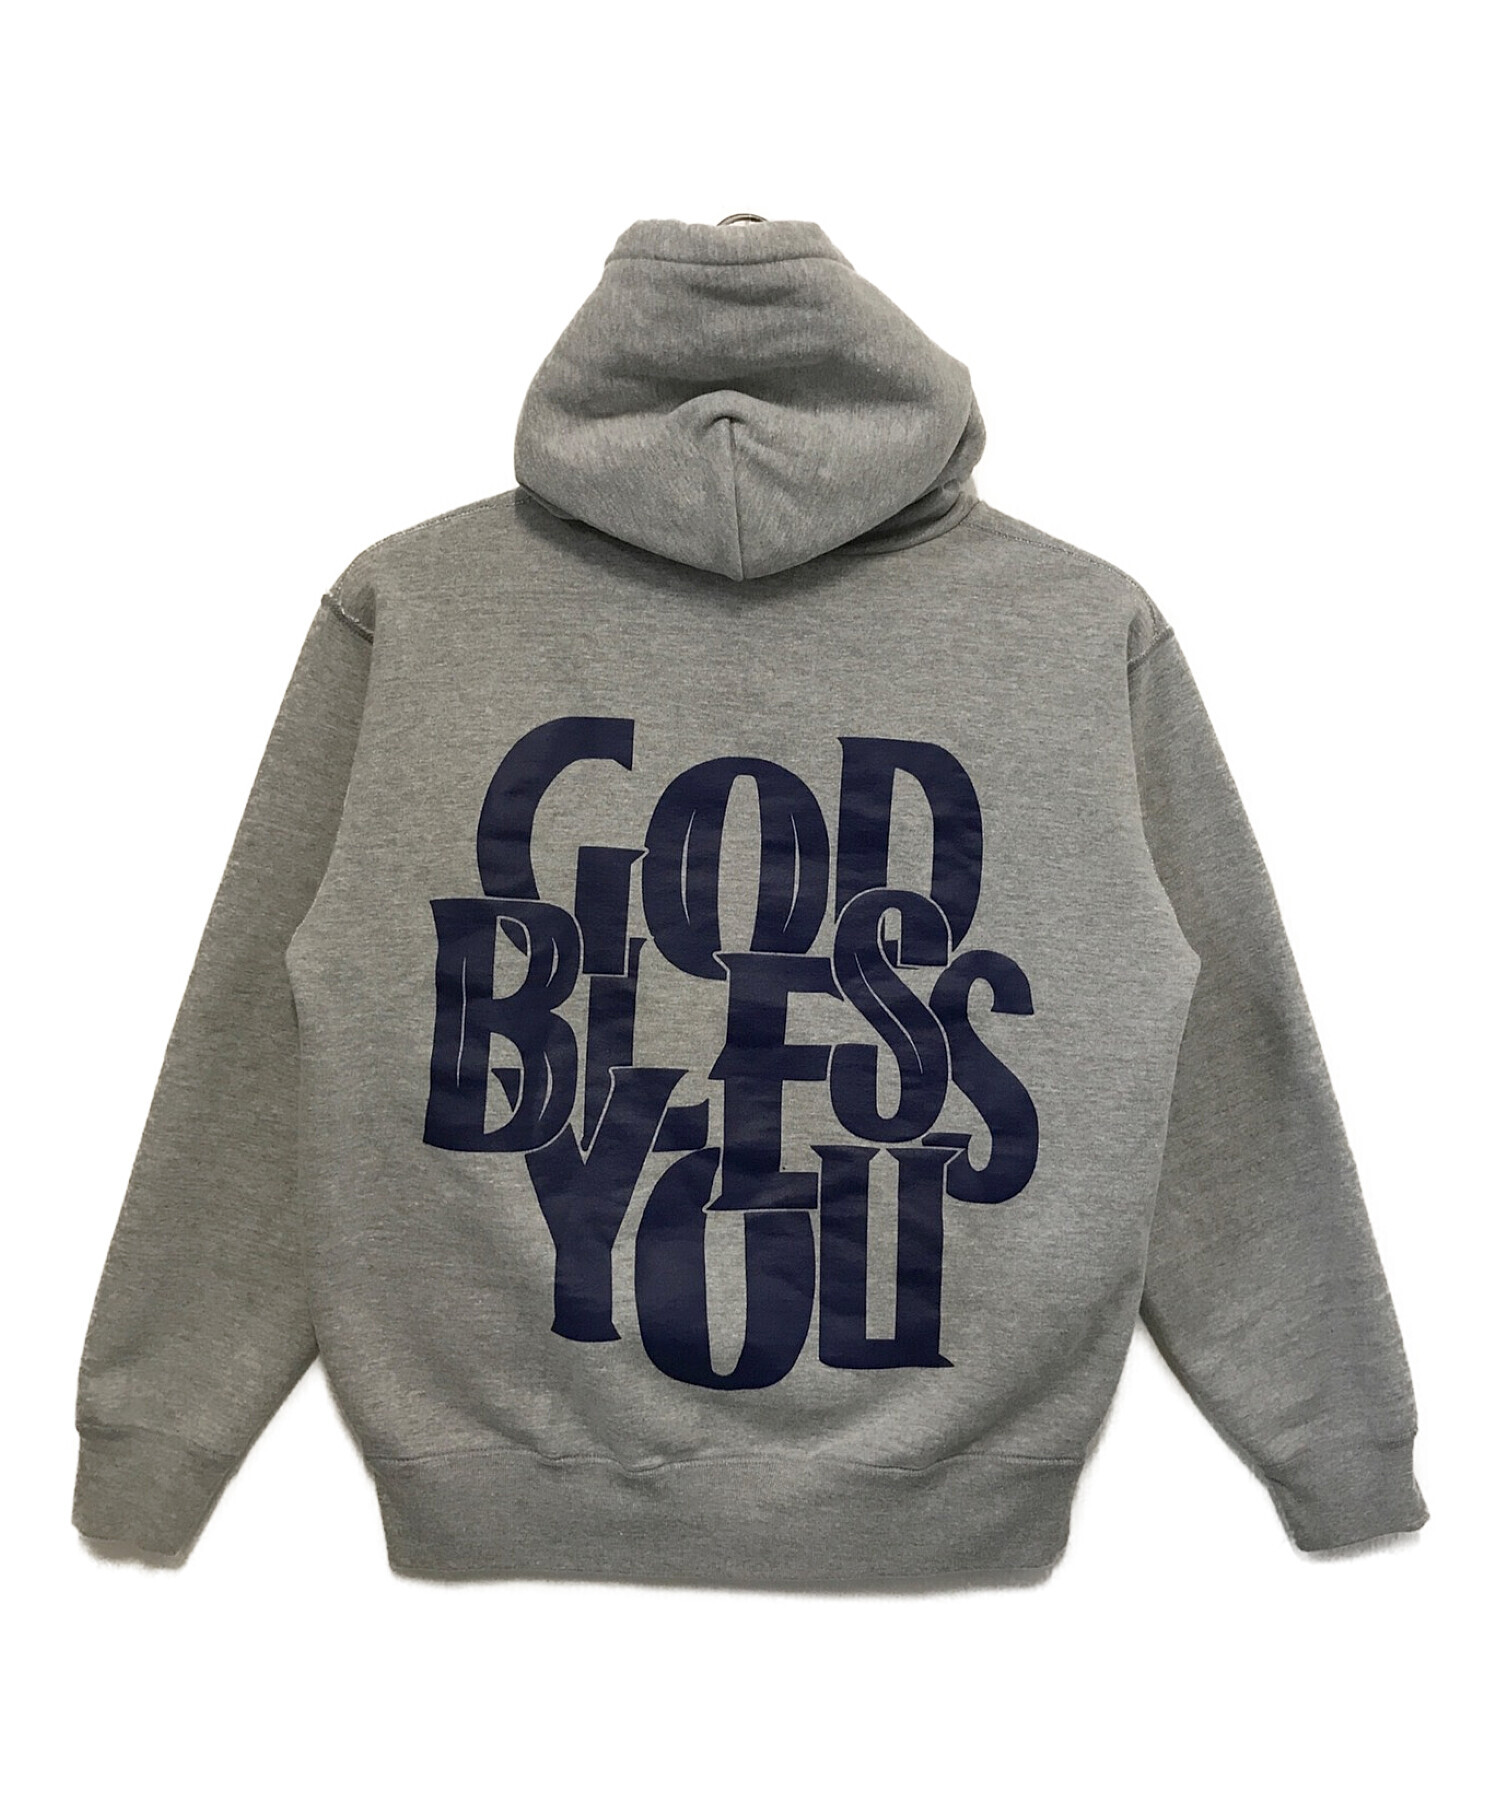 GOD BLESS YOU HOODIE EXAMPLE パーカー